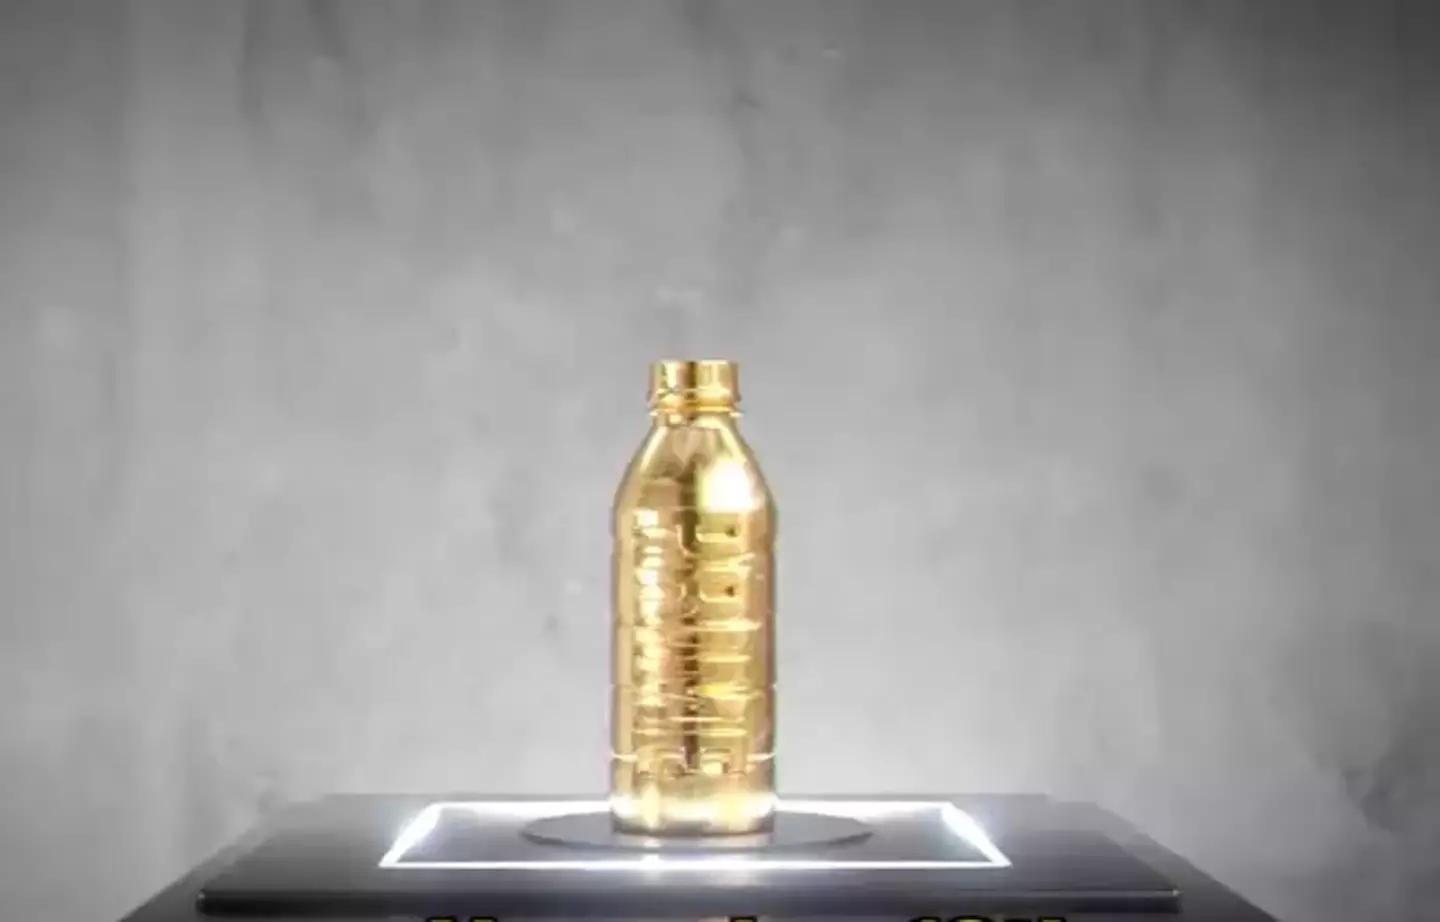 Fans had the chance to win the solid gold bottle.